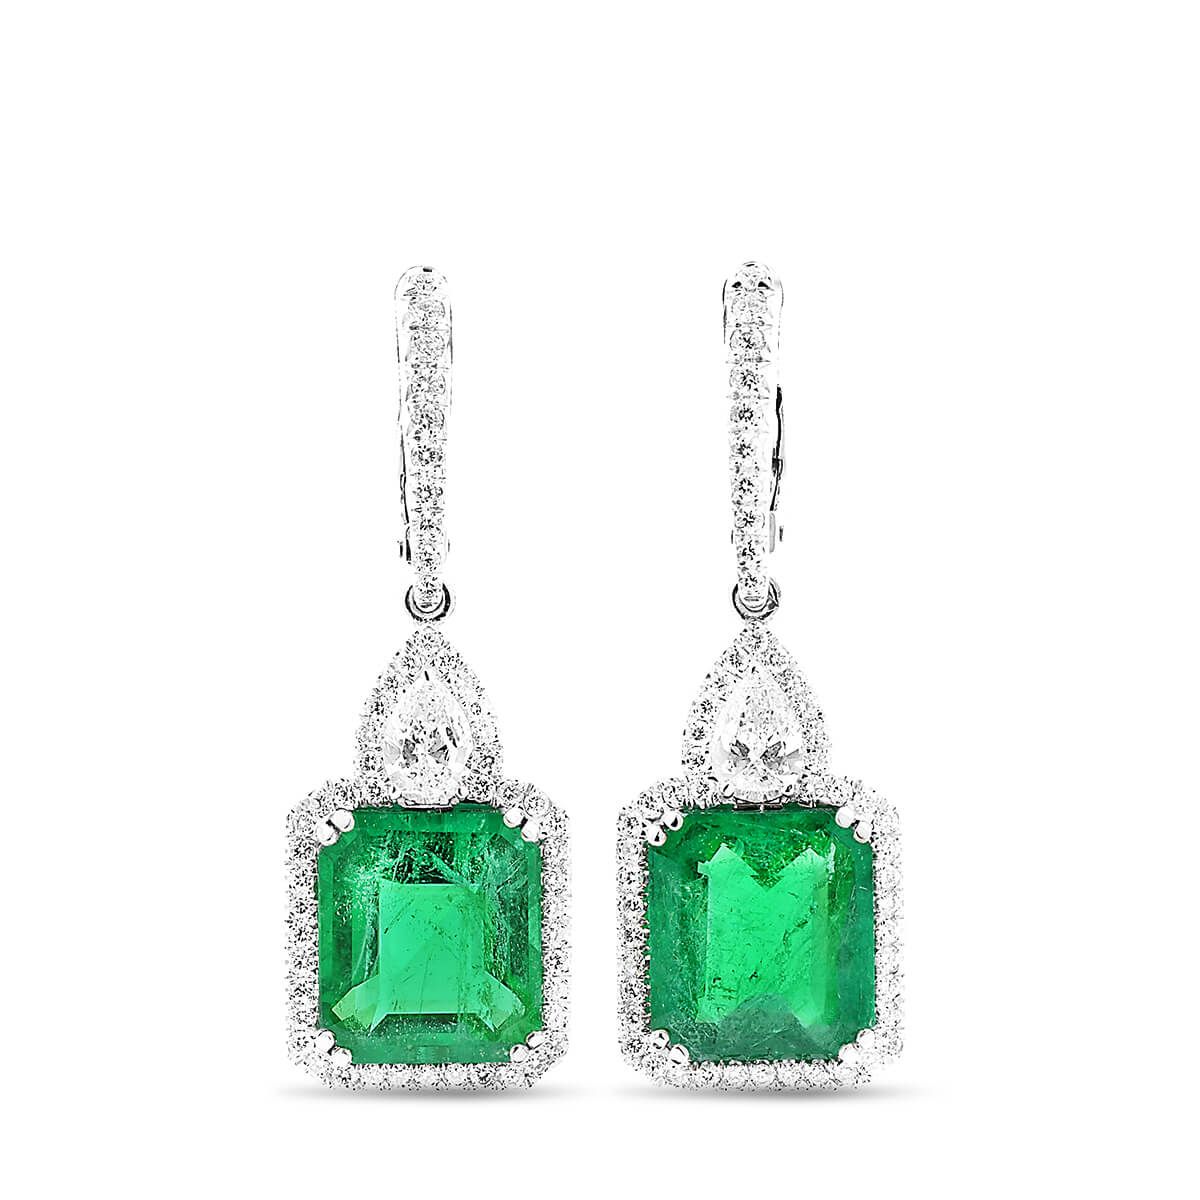 Natural Green Emerald Earrings, 11.30 Ct. TW, GRS Certified, GRS2017-098571, Unheated